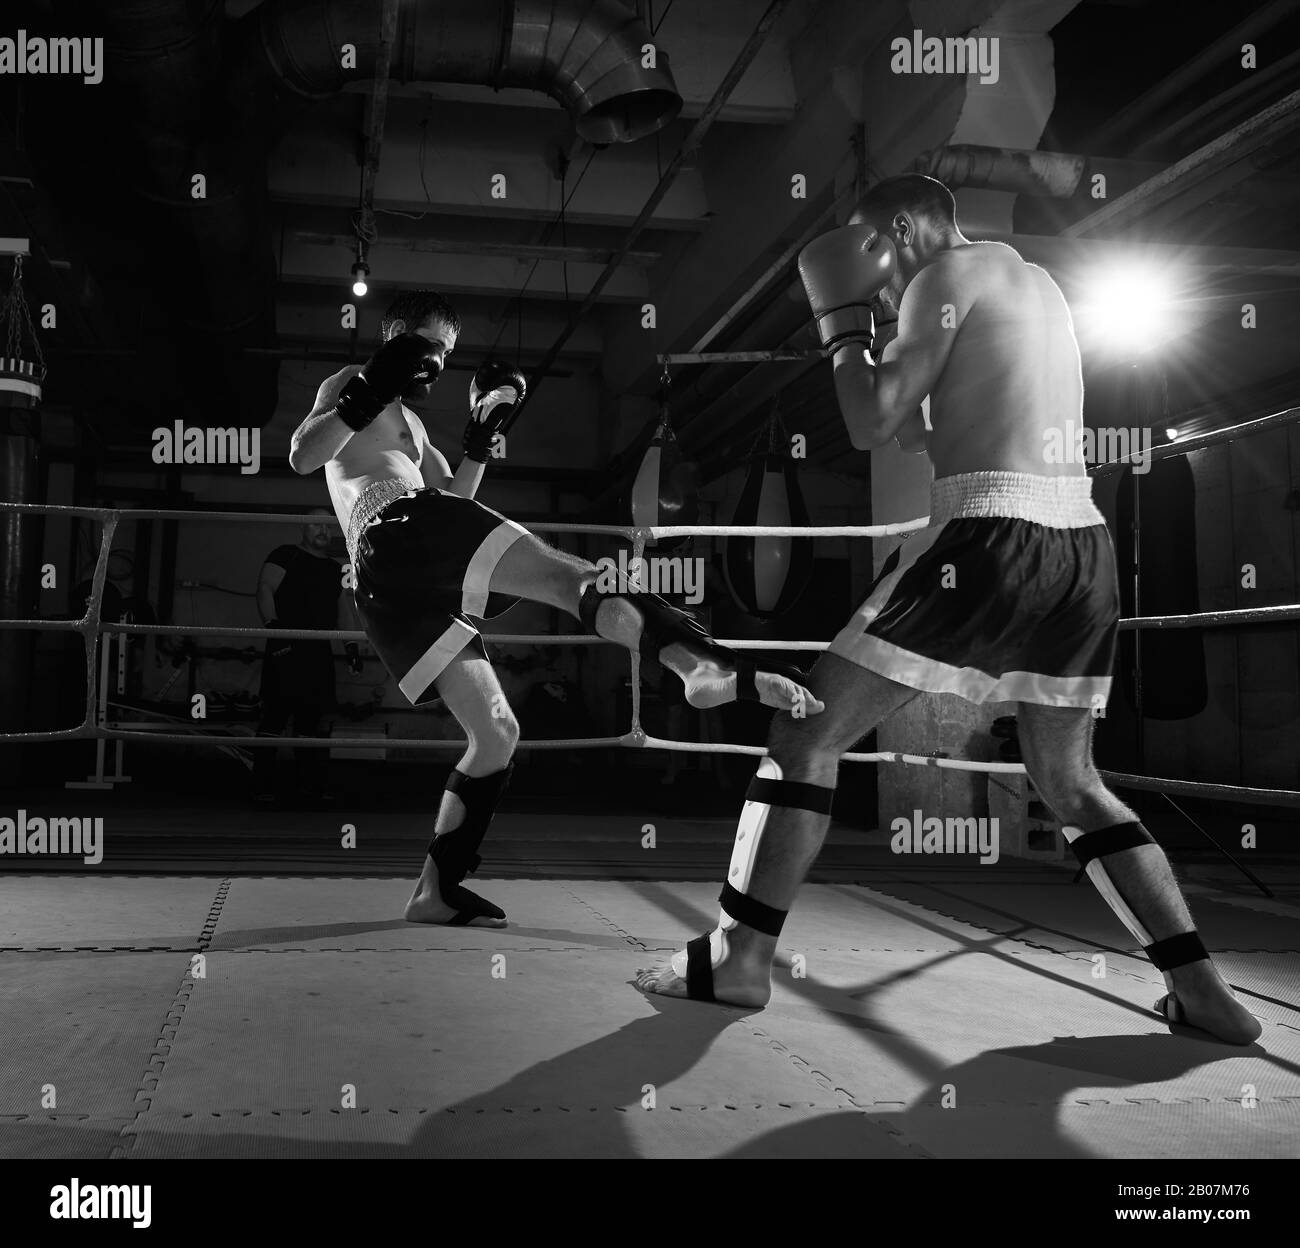 Two aggressive boxers training kickboxing in the ring at the sport club. Black and white image Stock Photo